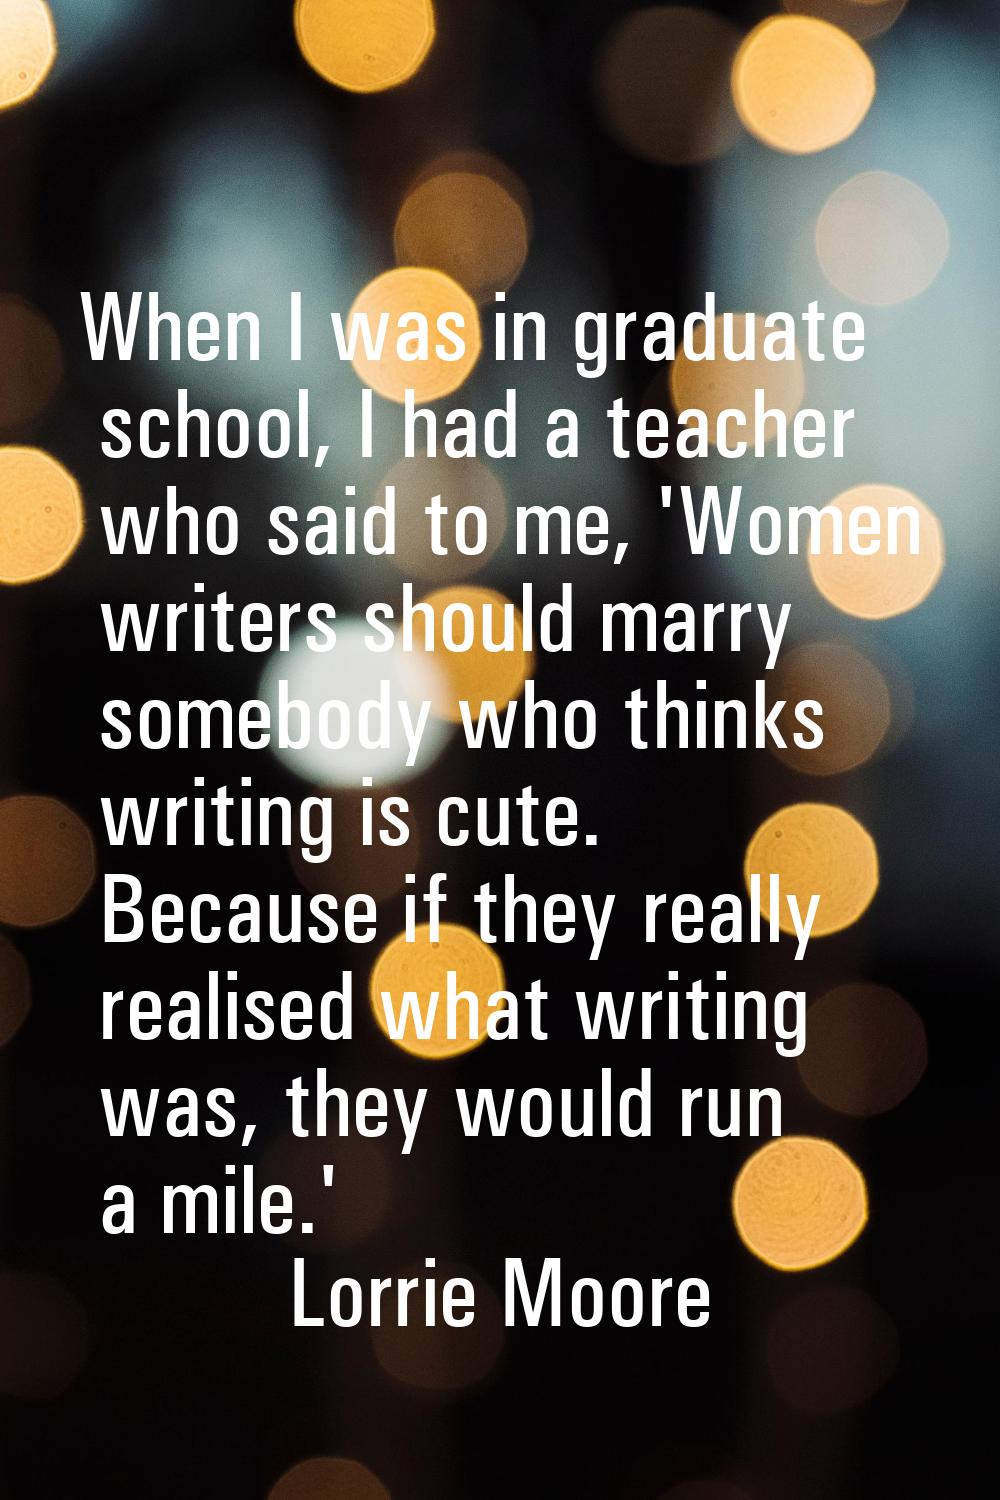 When I was in graduate school, I had a teacher who said to me, 'Women writers should marry somebody